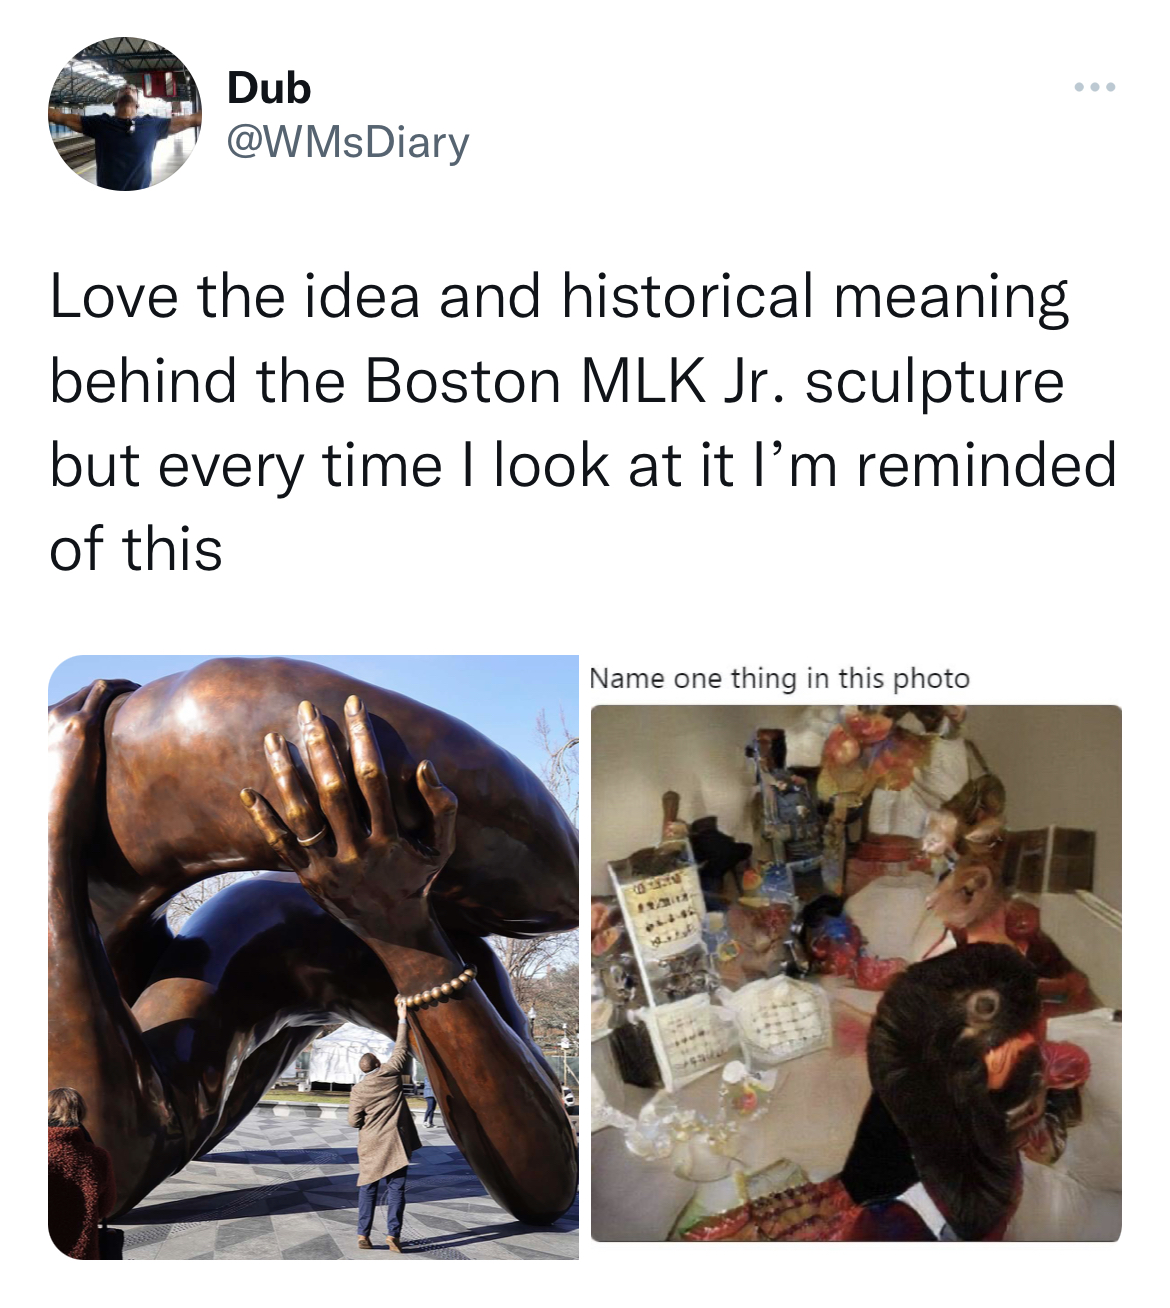 MLK Jr. Sculpture memes - stroke inducing - Dub Love the idea and historical meaning behind the Boston Mlk Jr. sculpture but every time I look at it I'm reminded of this Name one thing in this photo Res www 24